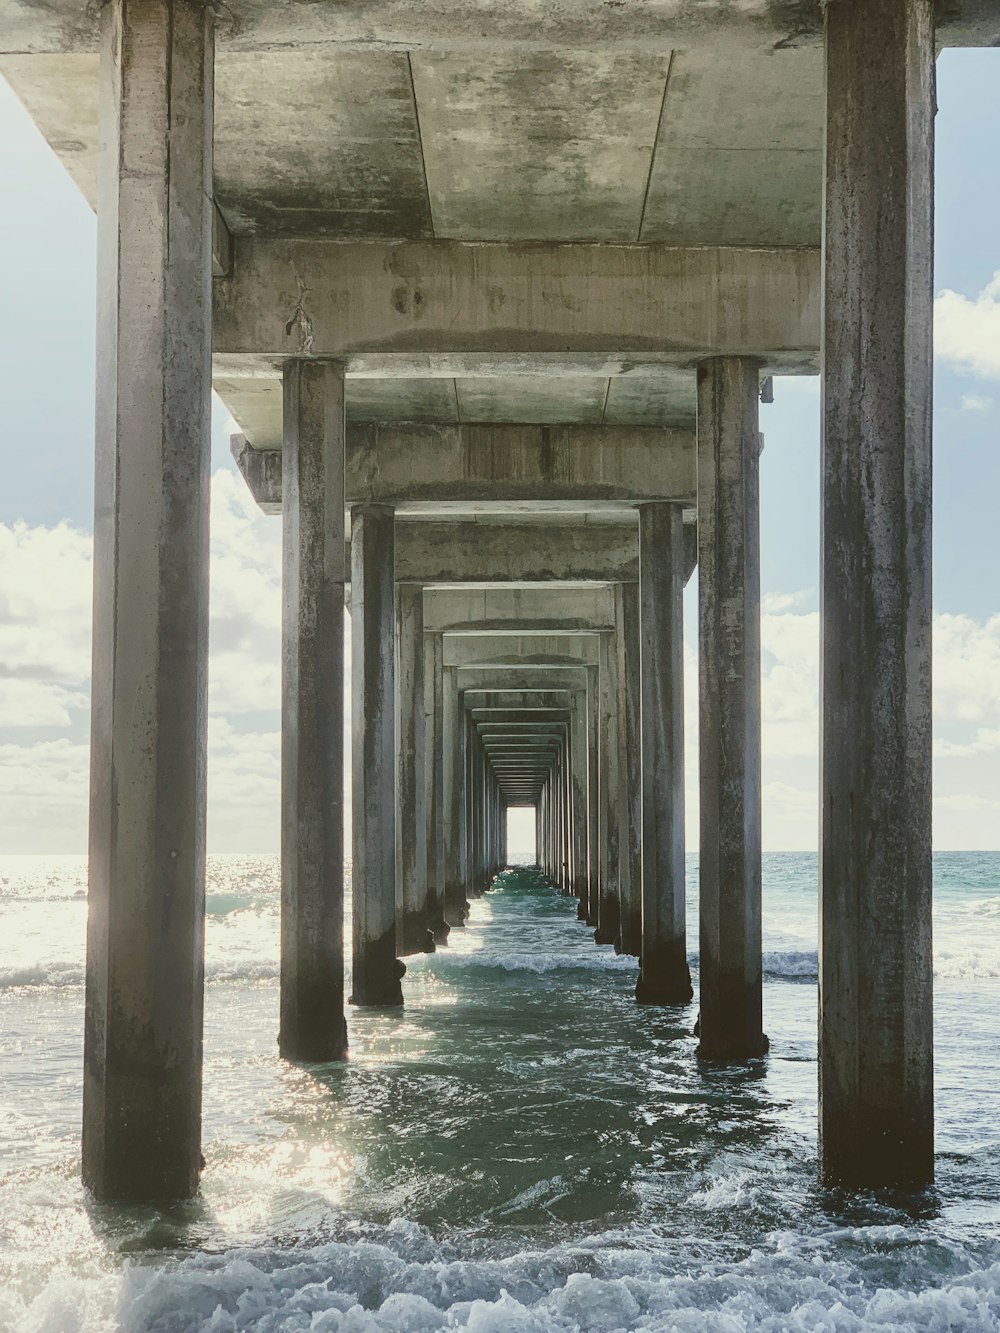 a long pier stretches into the ocean under a cloudy blue sky